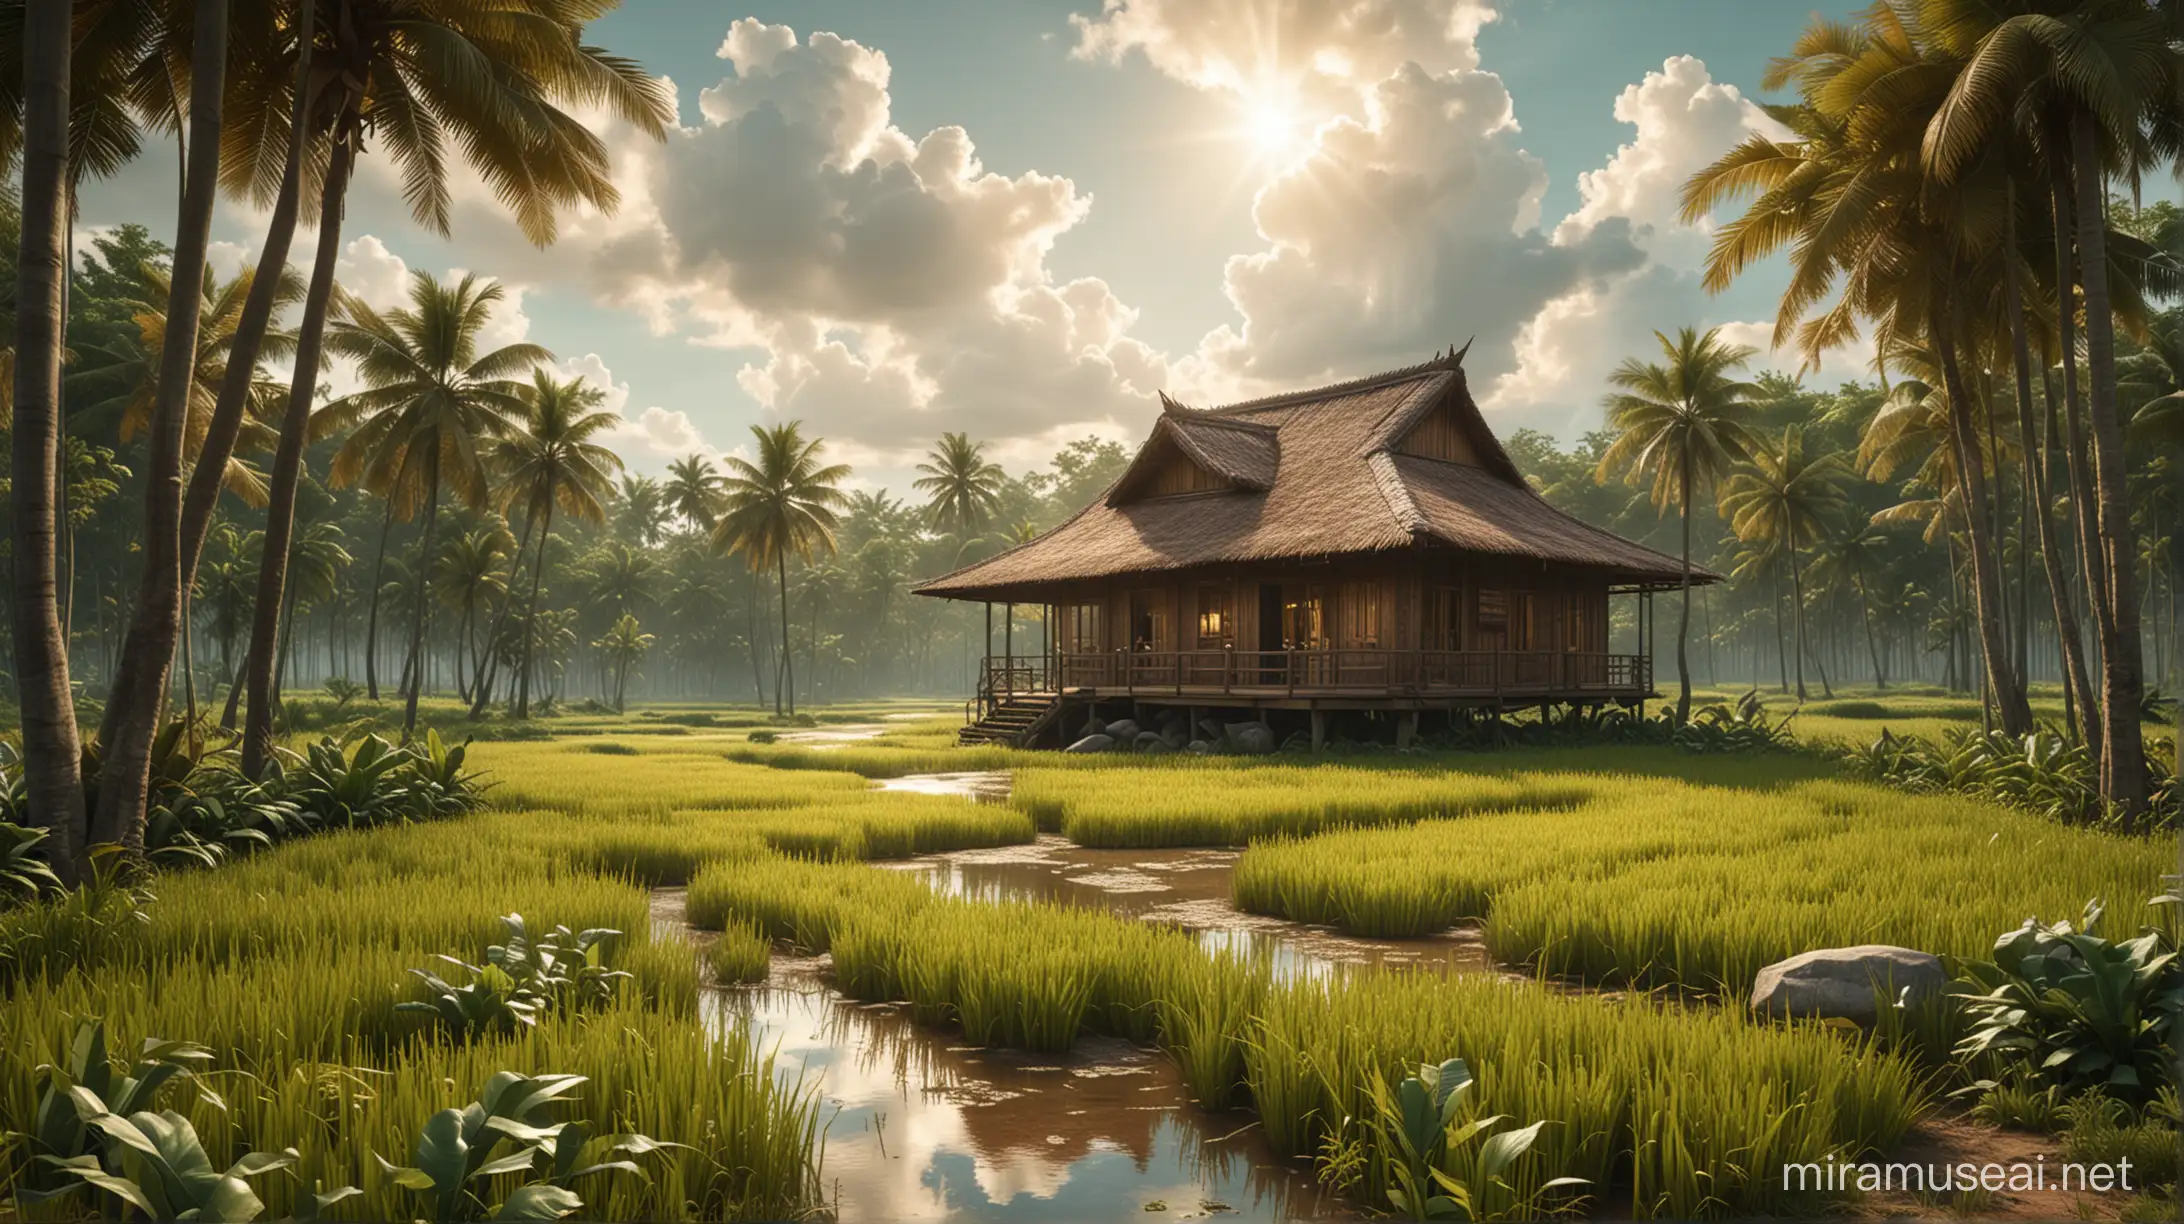 Rustic Wooden House Amidst Lush Rice Fields